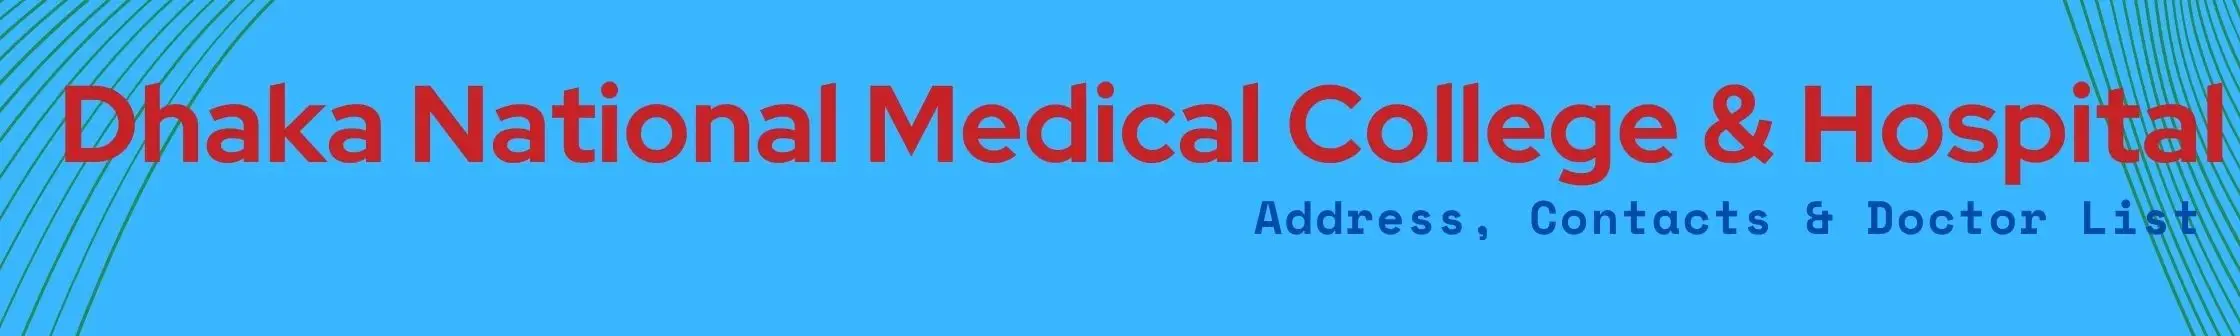 Dhaka national medical college hospital doctor list contacts